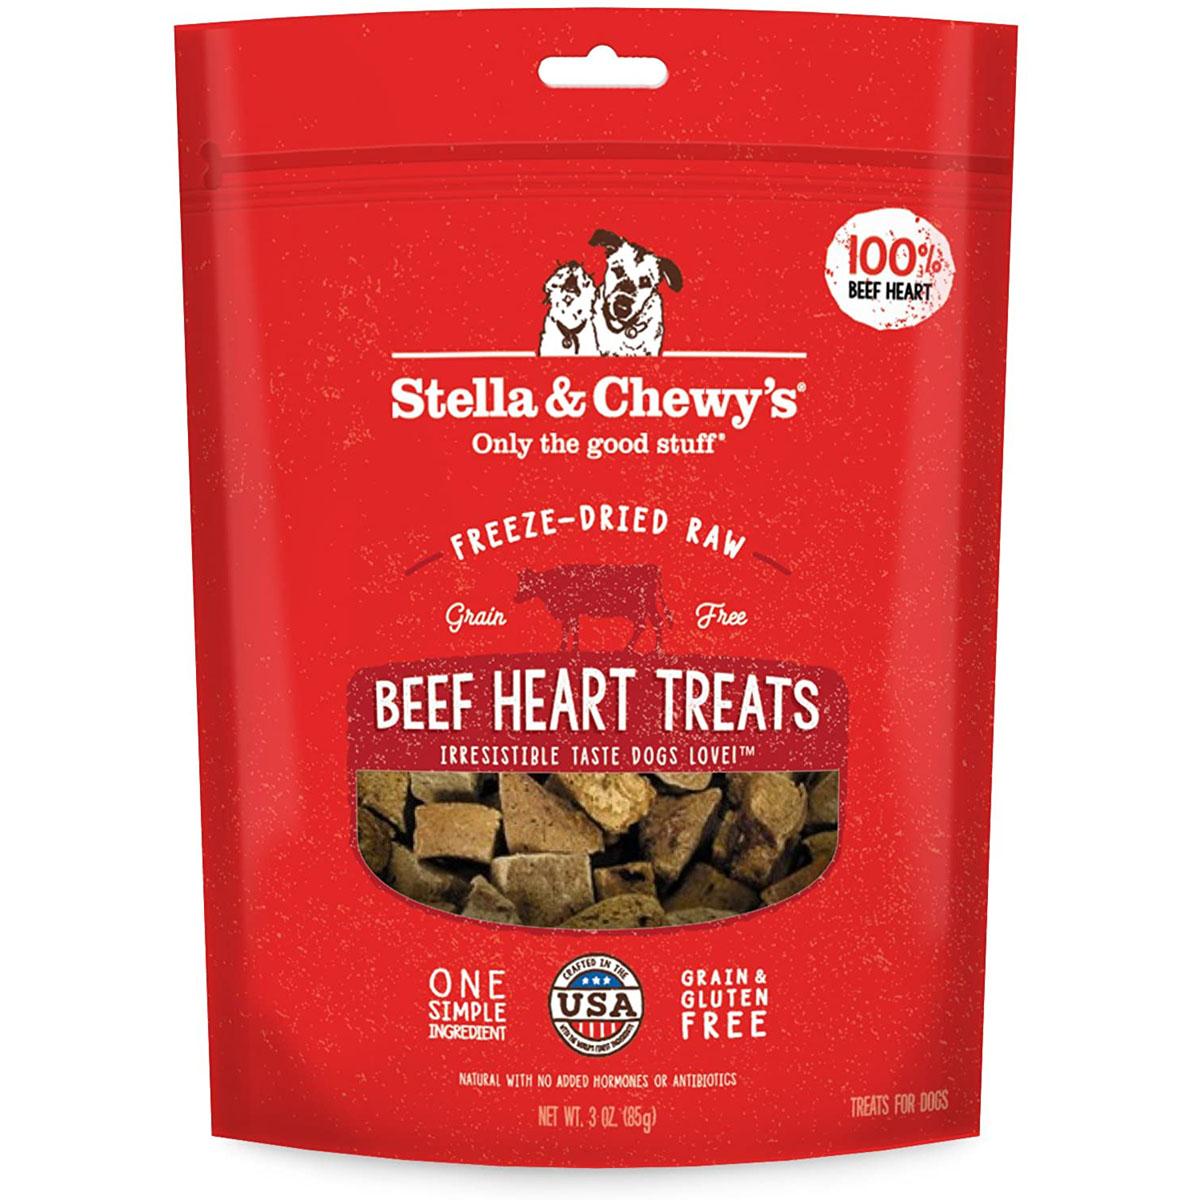 Stella and Chewys Freeze-Dried Raw Single Ingredient Treats for $7.12 Shipped